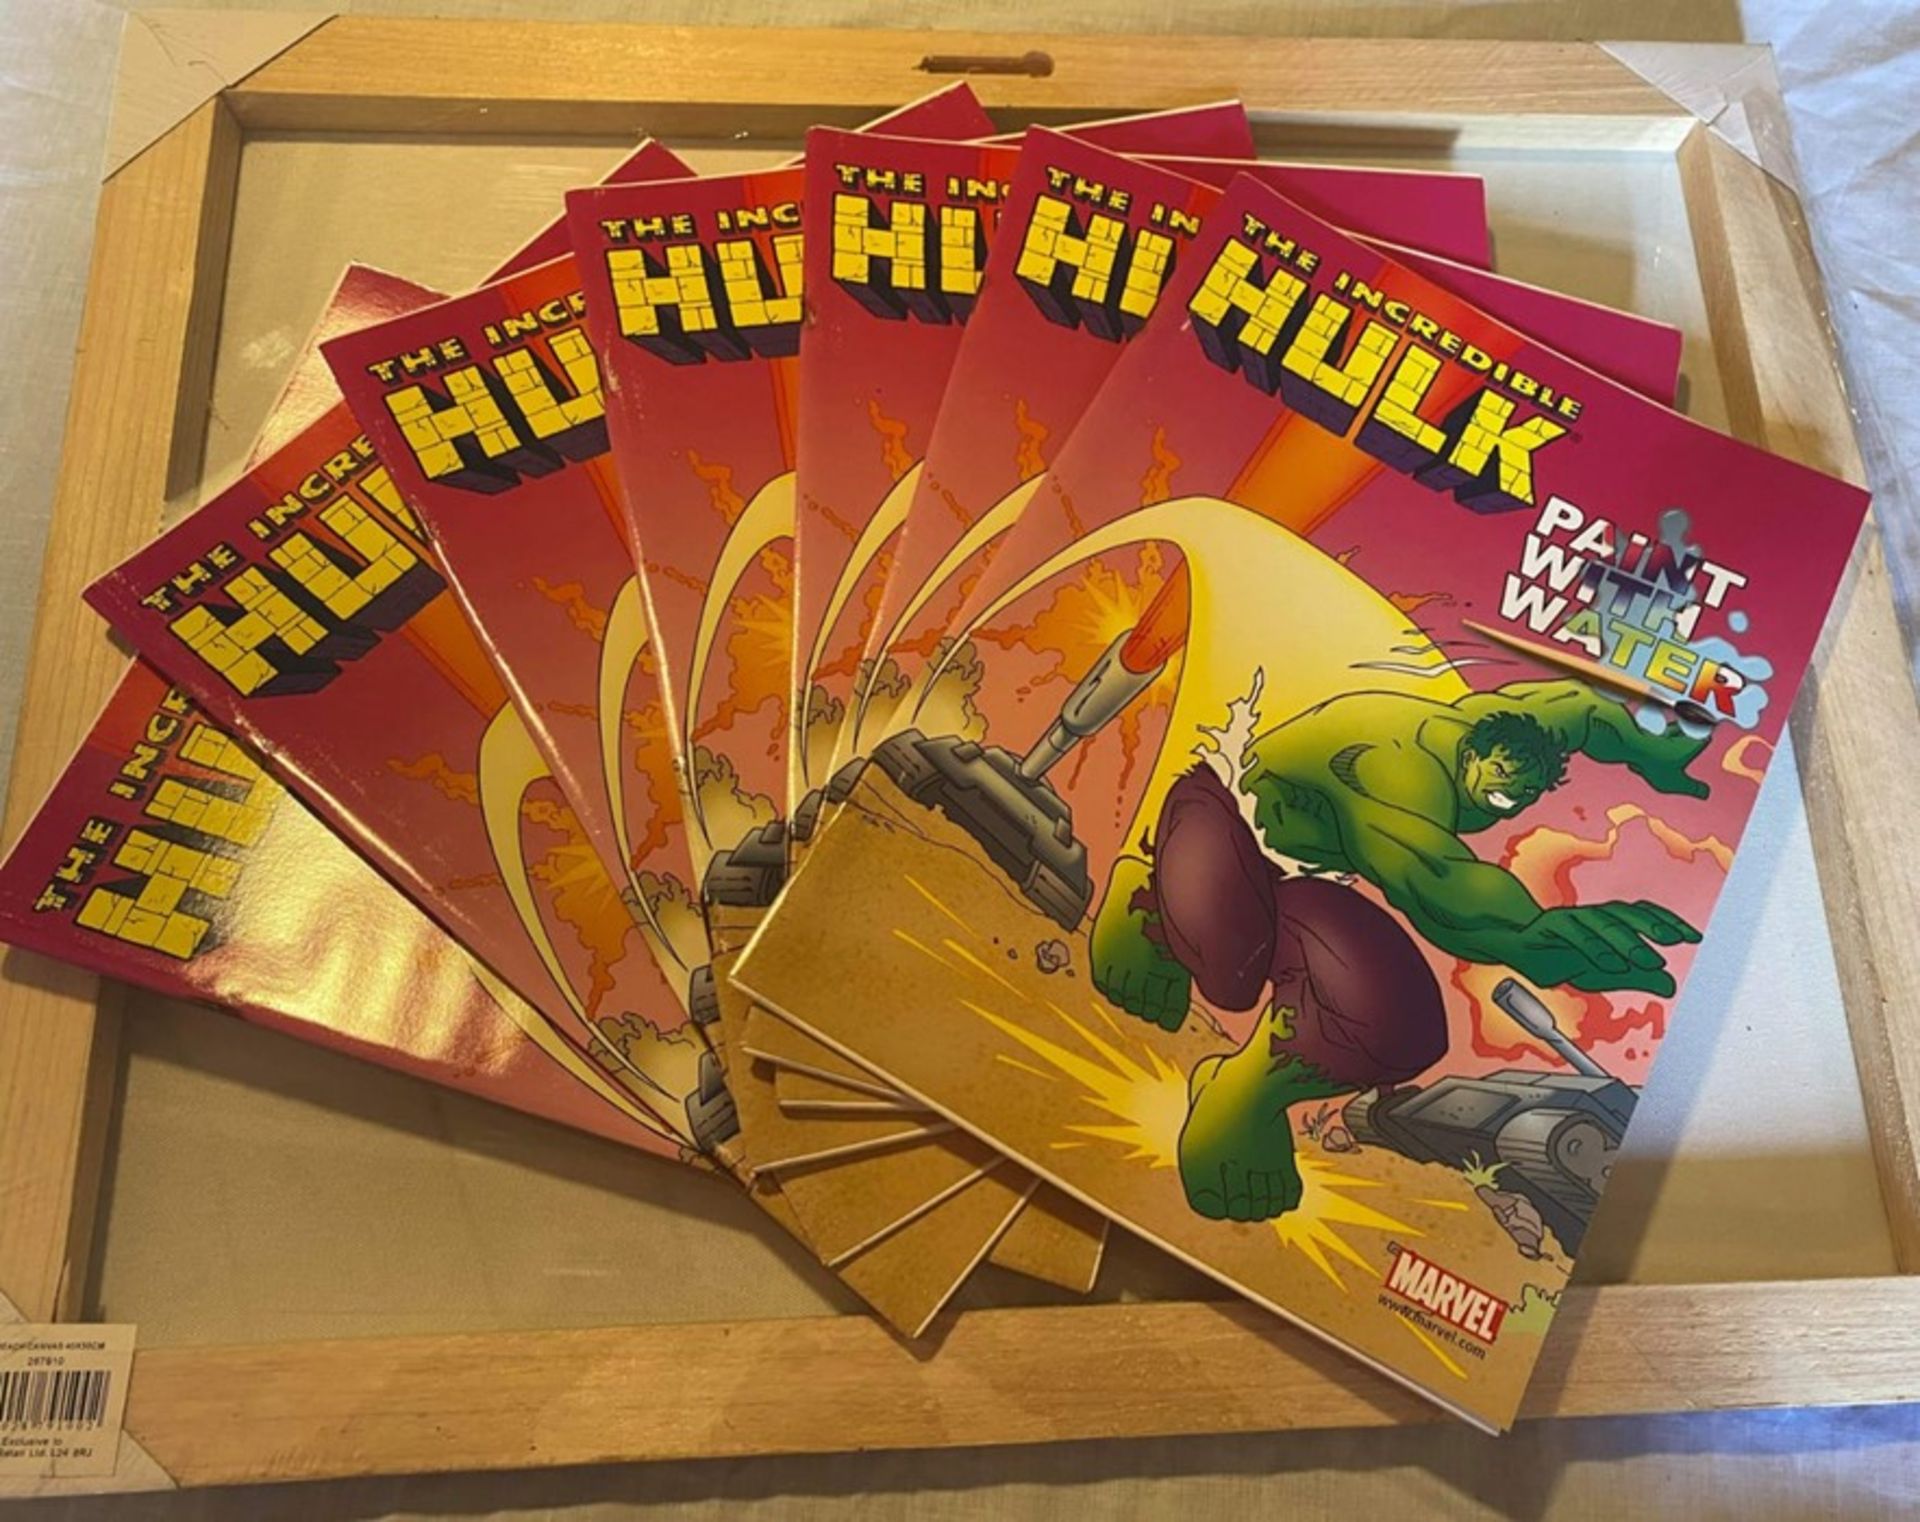 16 X THE INCREDIBLE HULK "PAINT WITH WATER" BOOKS